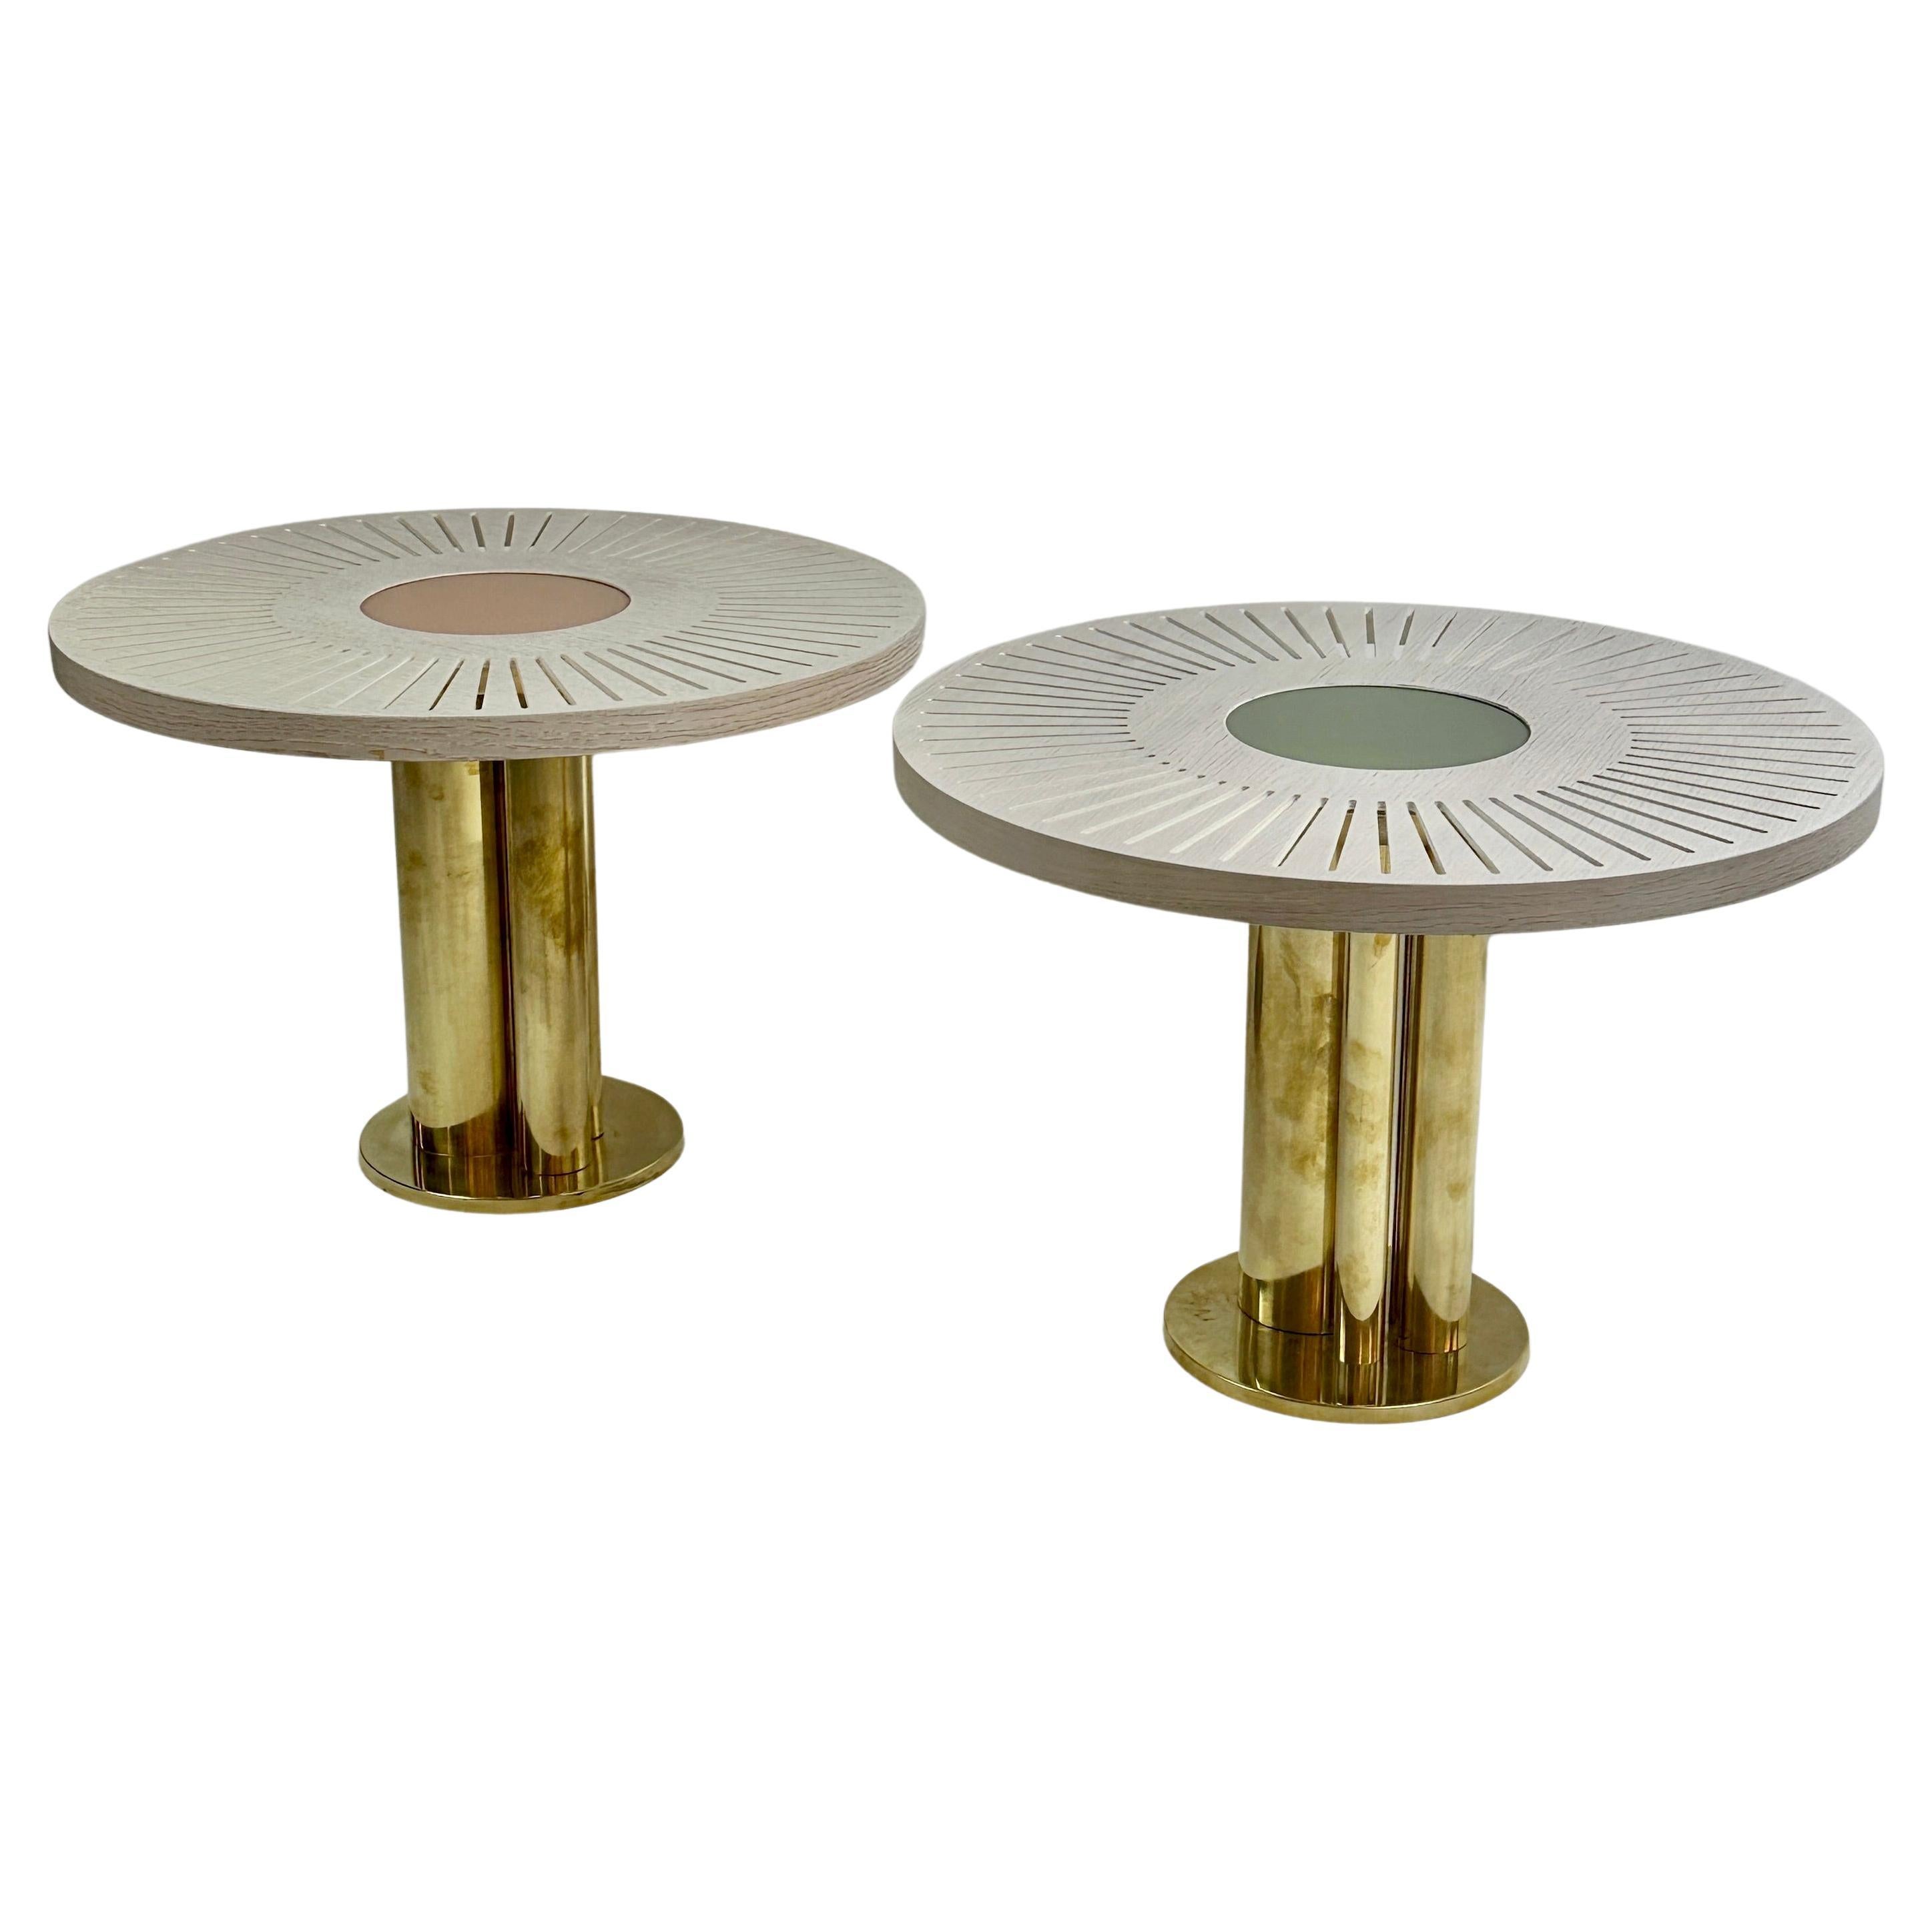 Late 20th Century Pair of Round Ash Wood w/ Opaline Glass & Brass Side Tables For Sale